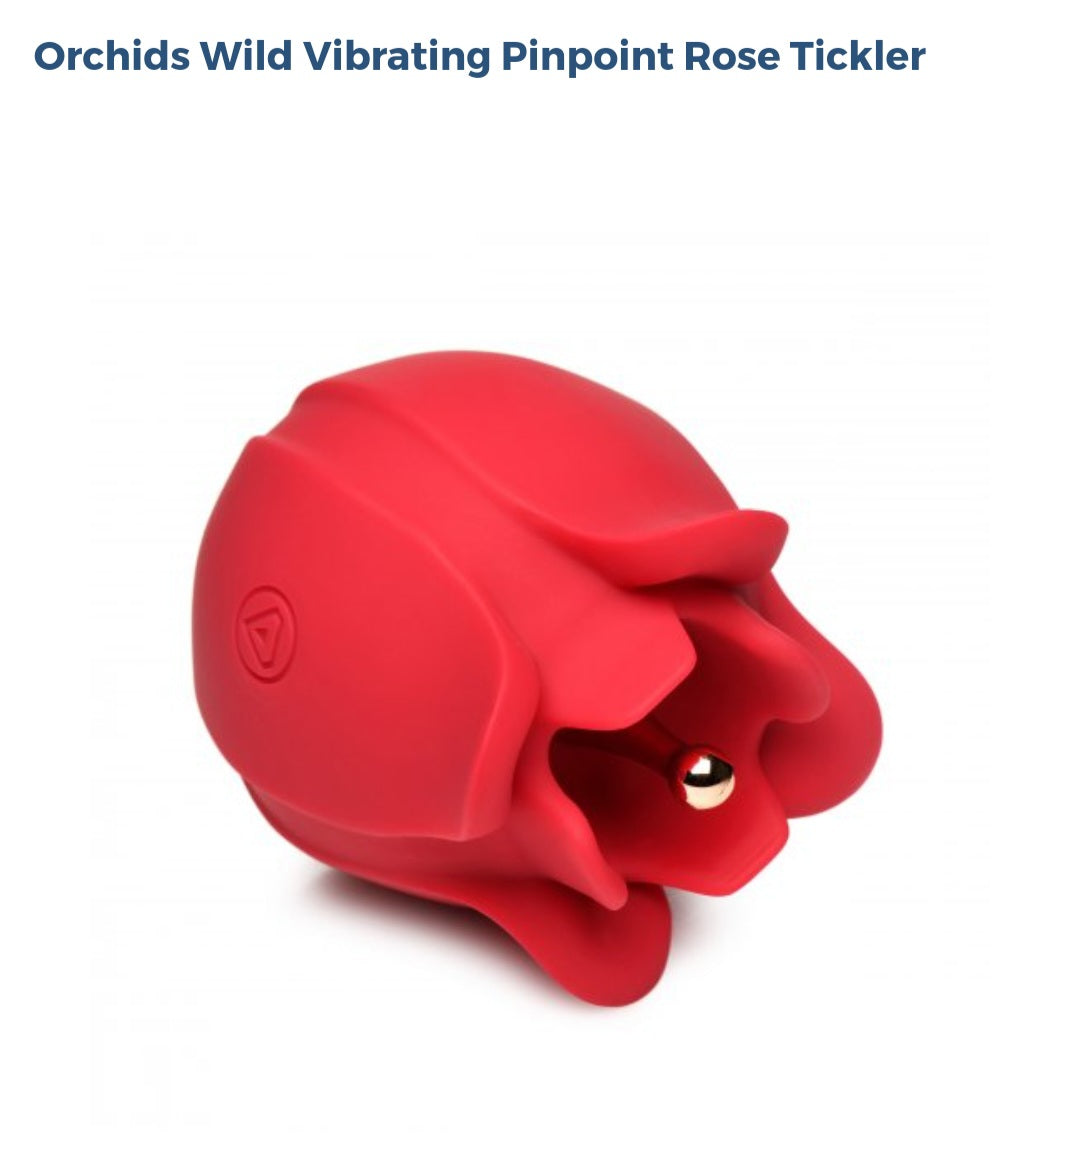 Orchards Wild Vibrating Pinpoint Rose Tickler